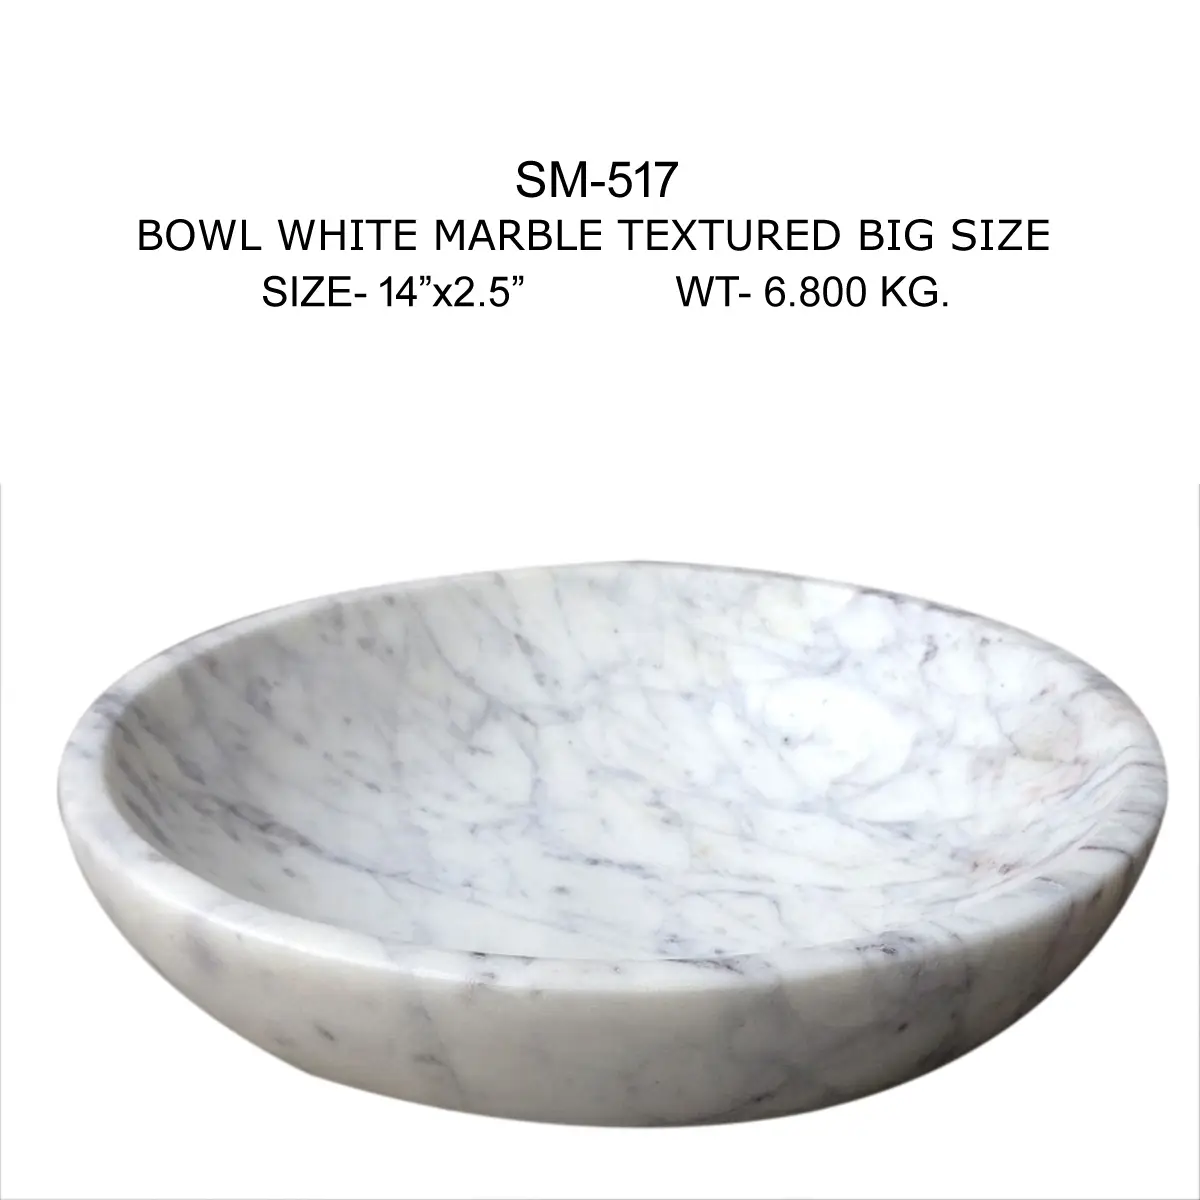 BOWL SAMPLE NO. 16 IN TExTURE IN BIG SIZE